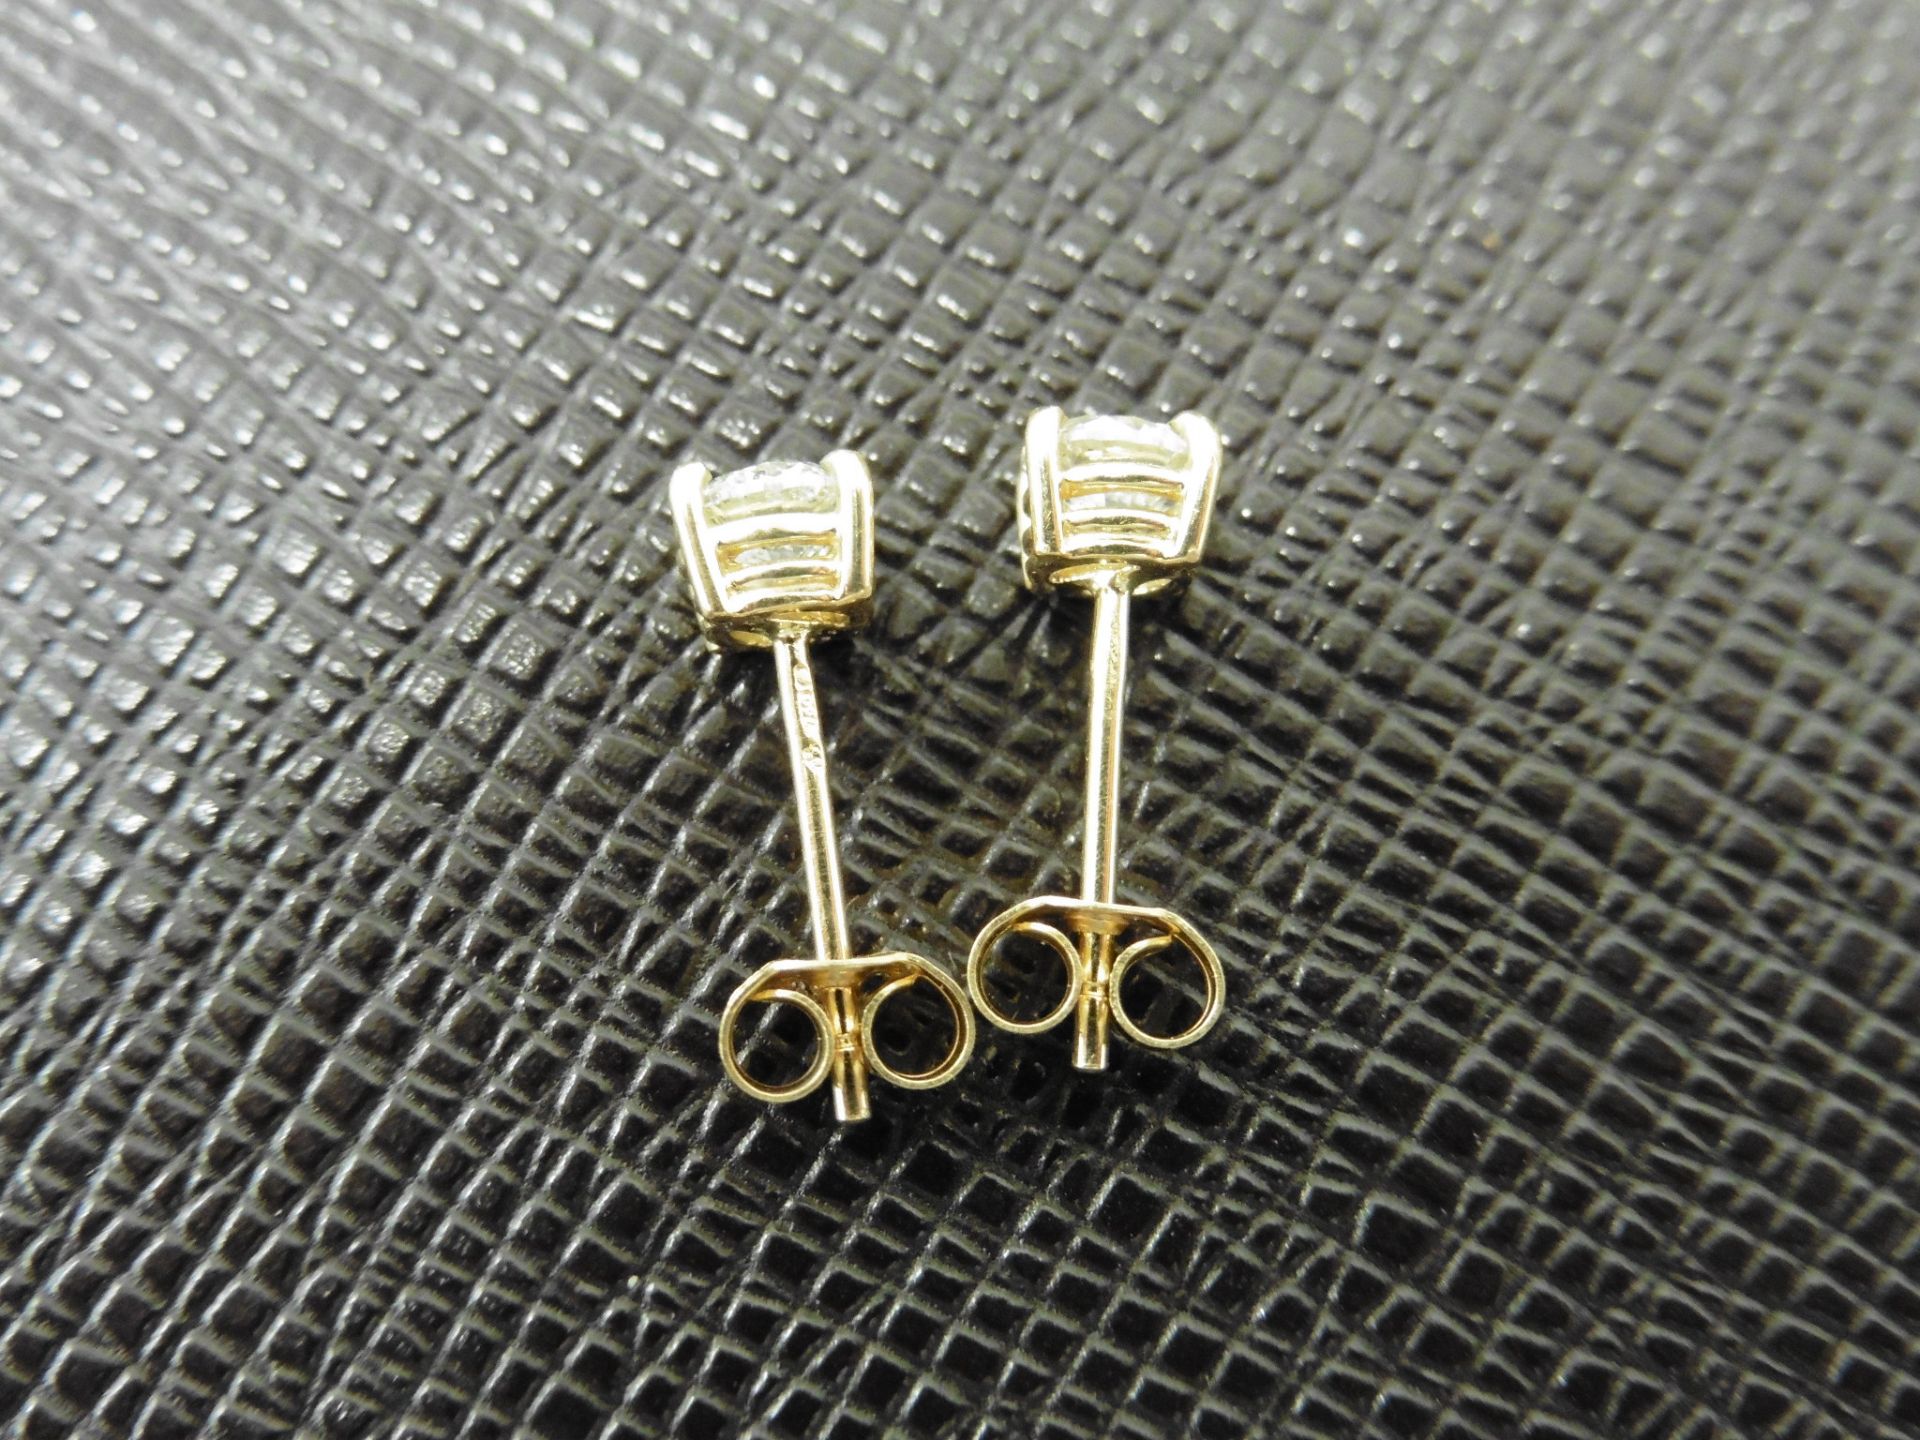 1.00ct diamond solitaire earrings set in 18ct yellow gold. 2 x brilliant cut diamonds, 0.50ct ( - Image 2 of 2